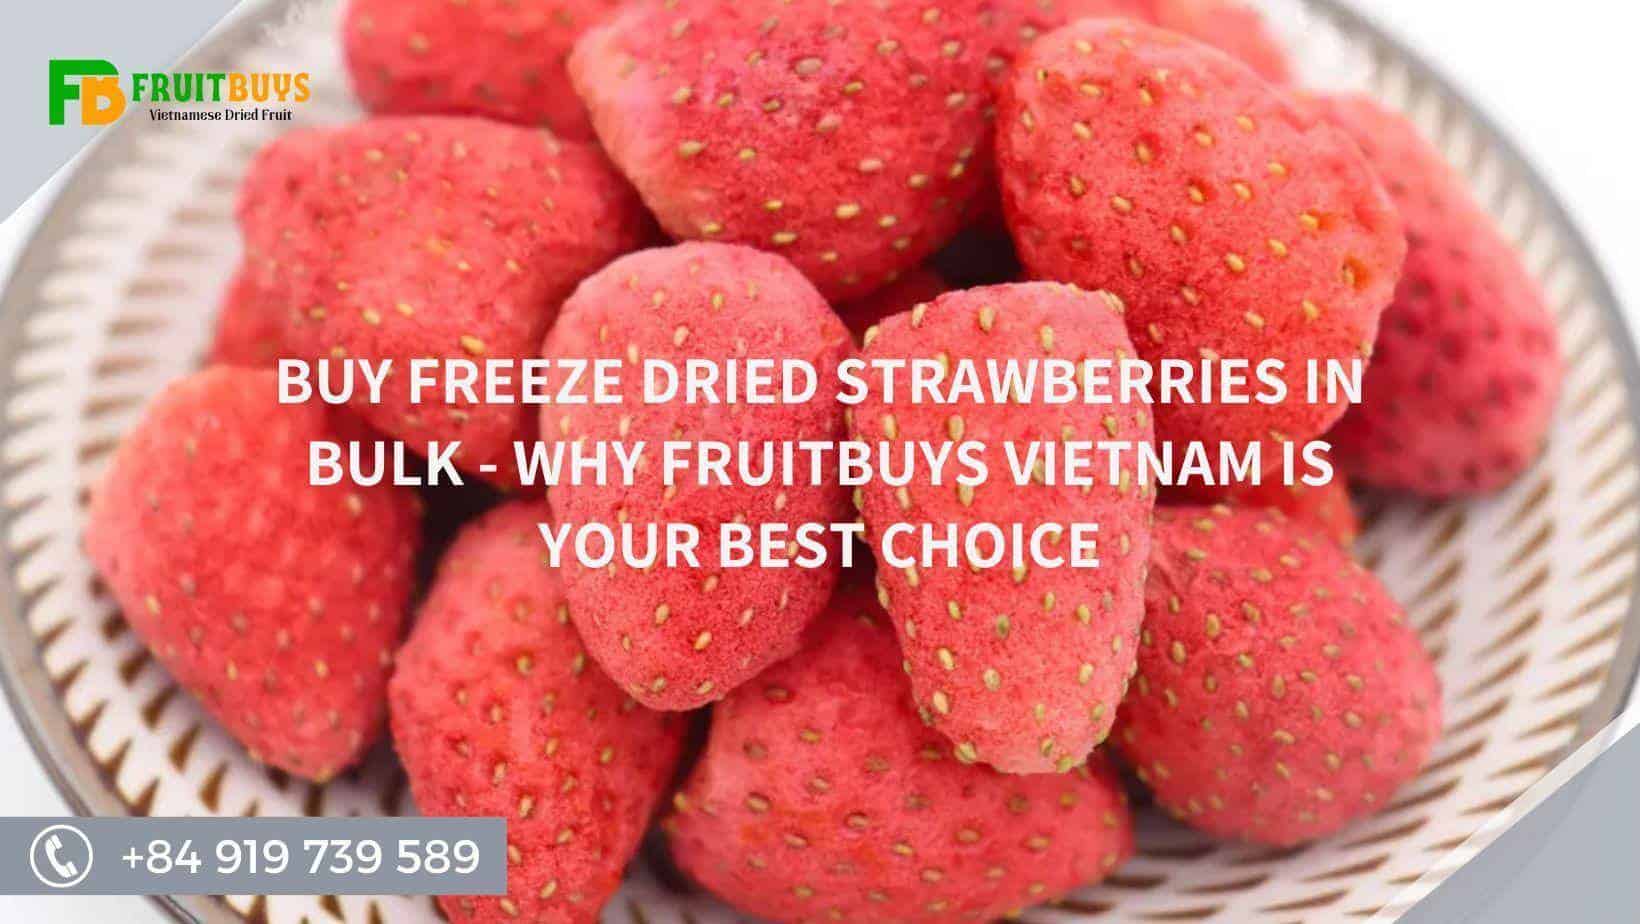 FruitBuys Vietnam  Buy Freeze Dried Strawberries In Bulk   Why FruitBuys Vietnam Is Your Best Choice